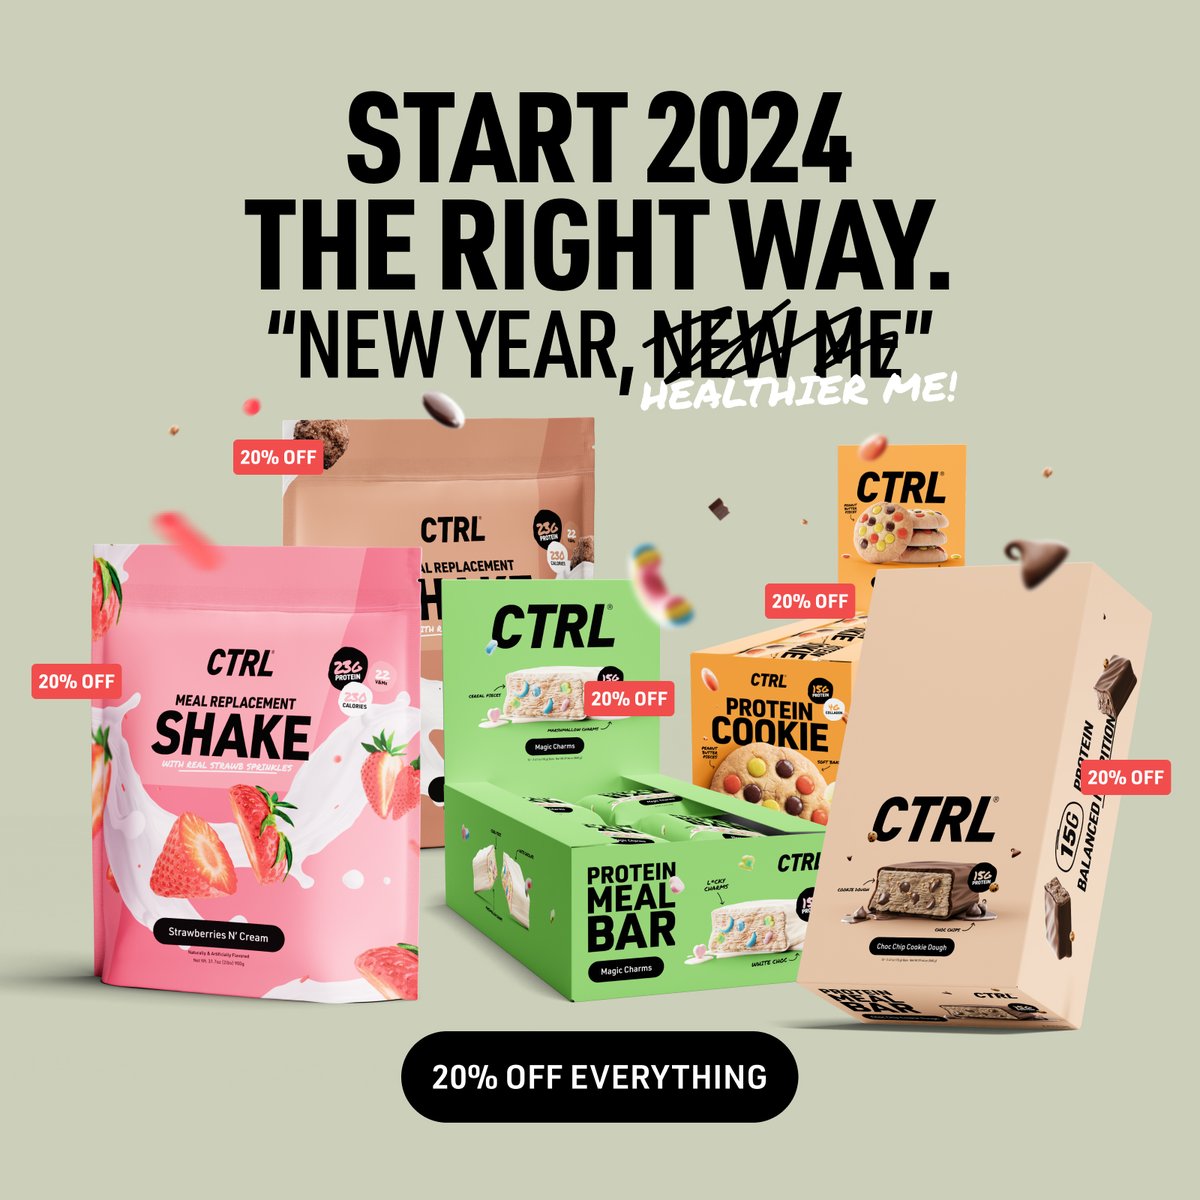 New Year’s Sale is LIVE 🚨 Let’s be real it’s 2024, and it’s time to ditch those cliche sayings. For a limited time, we’ve marked everything 20% off to help you become the best version of yourself. Hurry up and let’s get to work. 💰drinkctrl.com💰